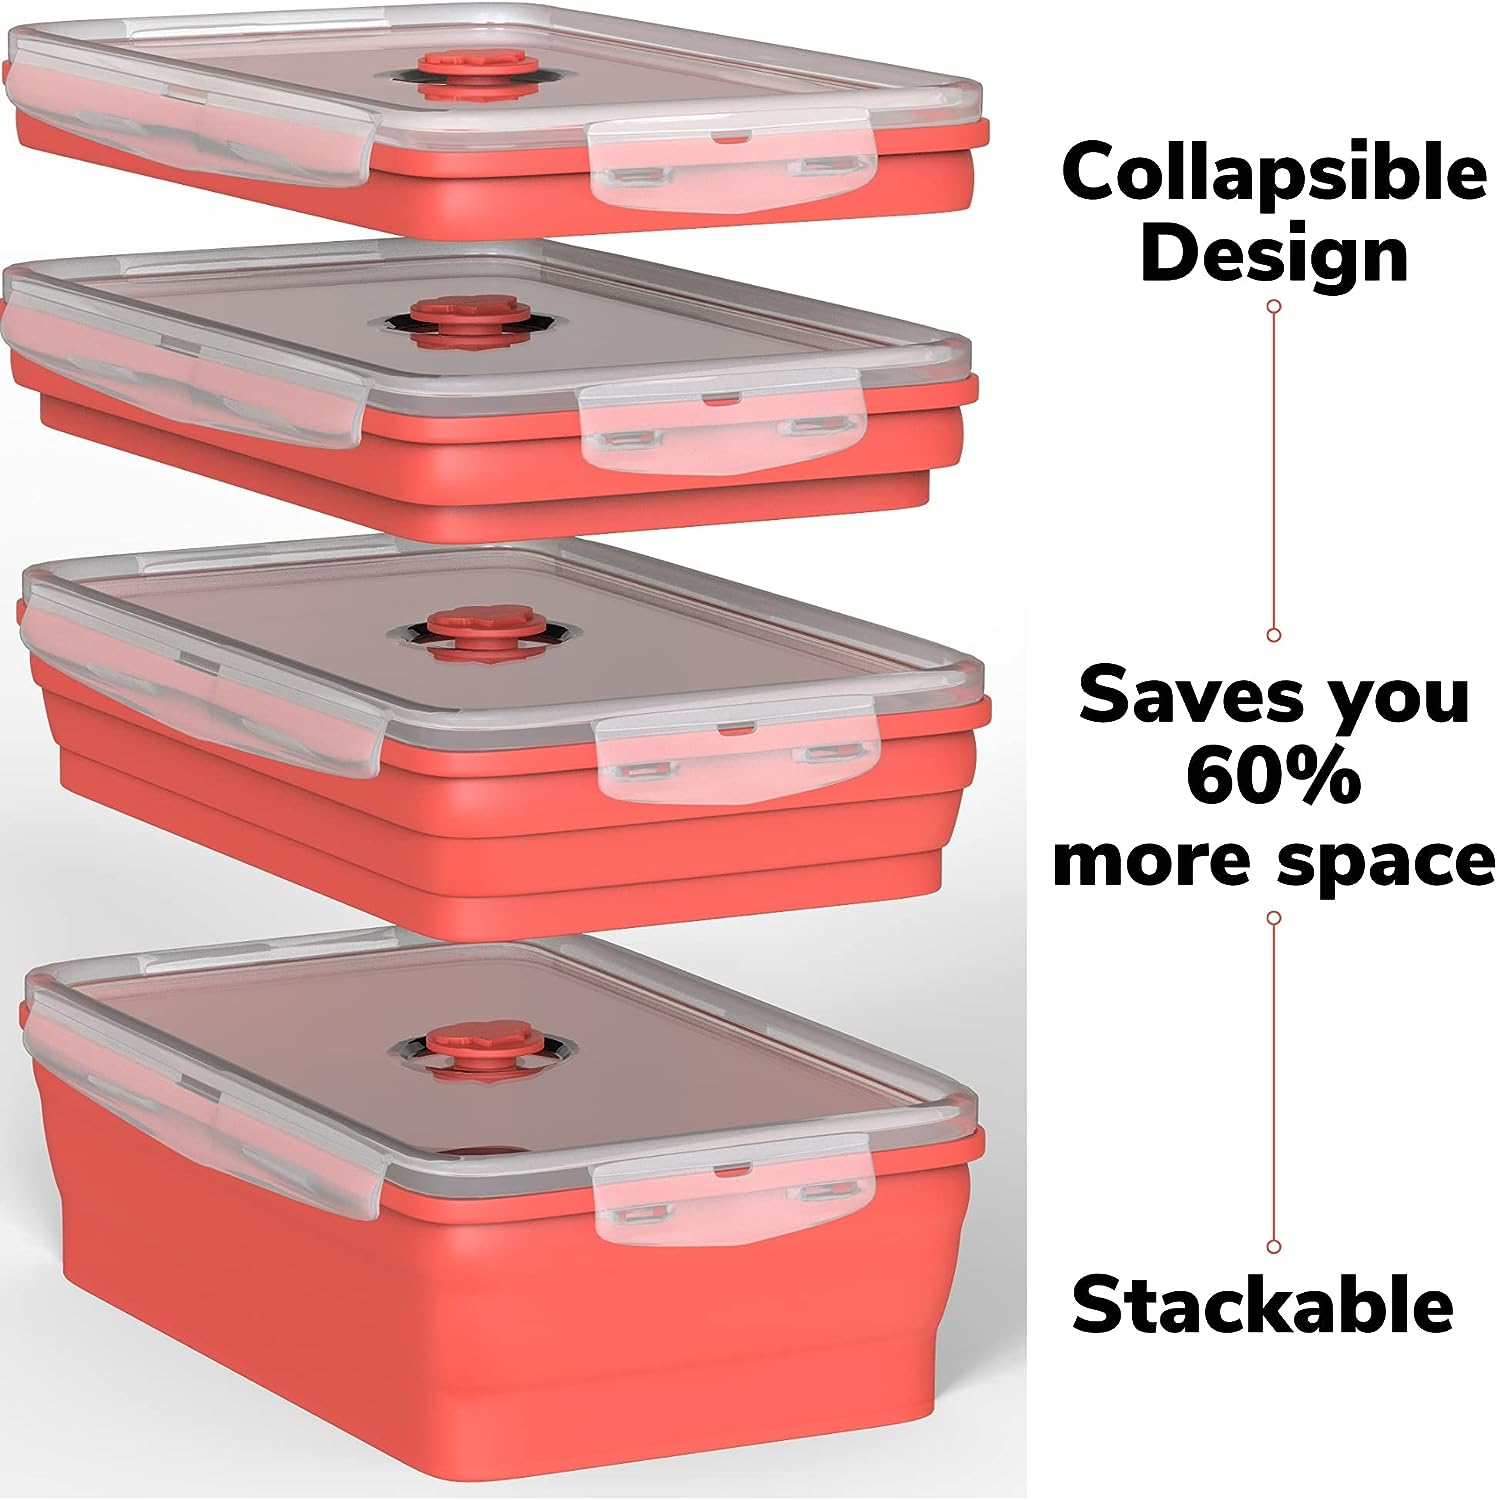 ECOBERI Collapsible Food Storage Containers, Airtight Snap-Top Lids,  Microwave, Dishwasher Safe, BPA Free Silicone, Set of 5